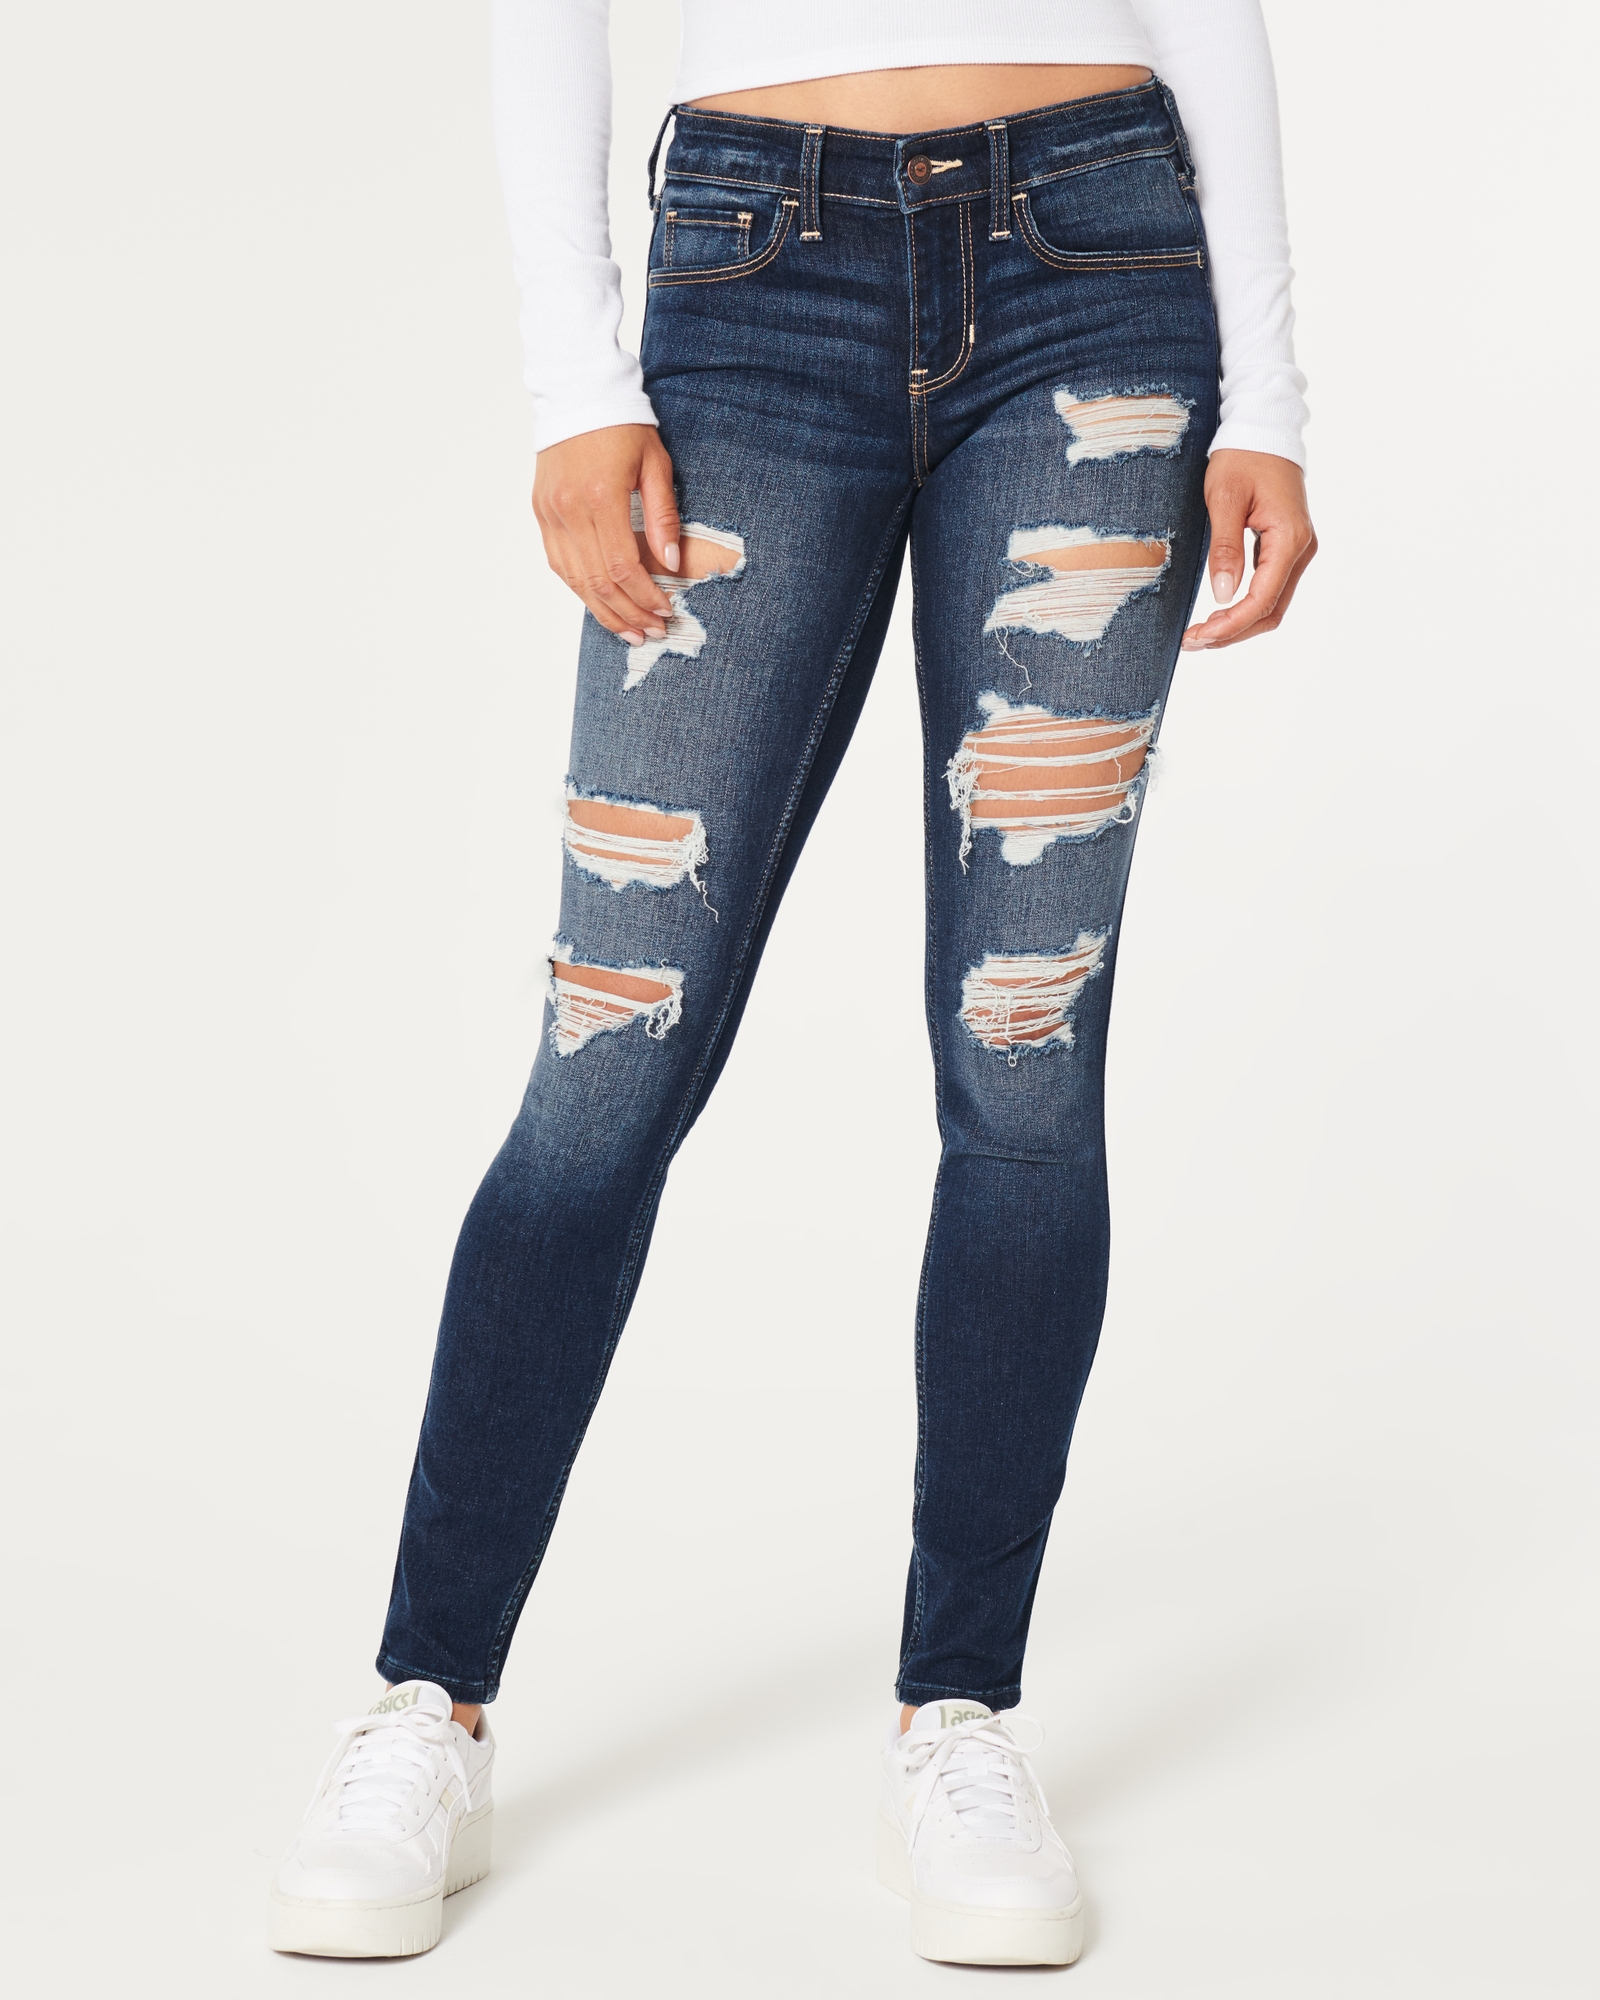 https://img.hollisterco.com/is/image/anf/KIC_355-3358-0838-279_model2.jpg?policy=product-extra-large